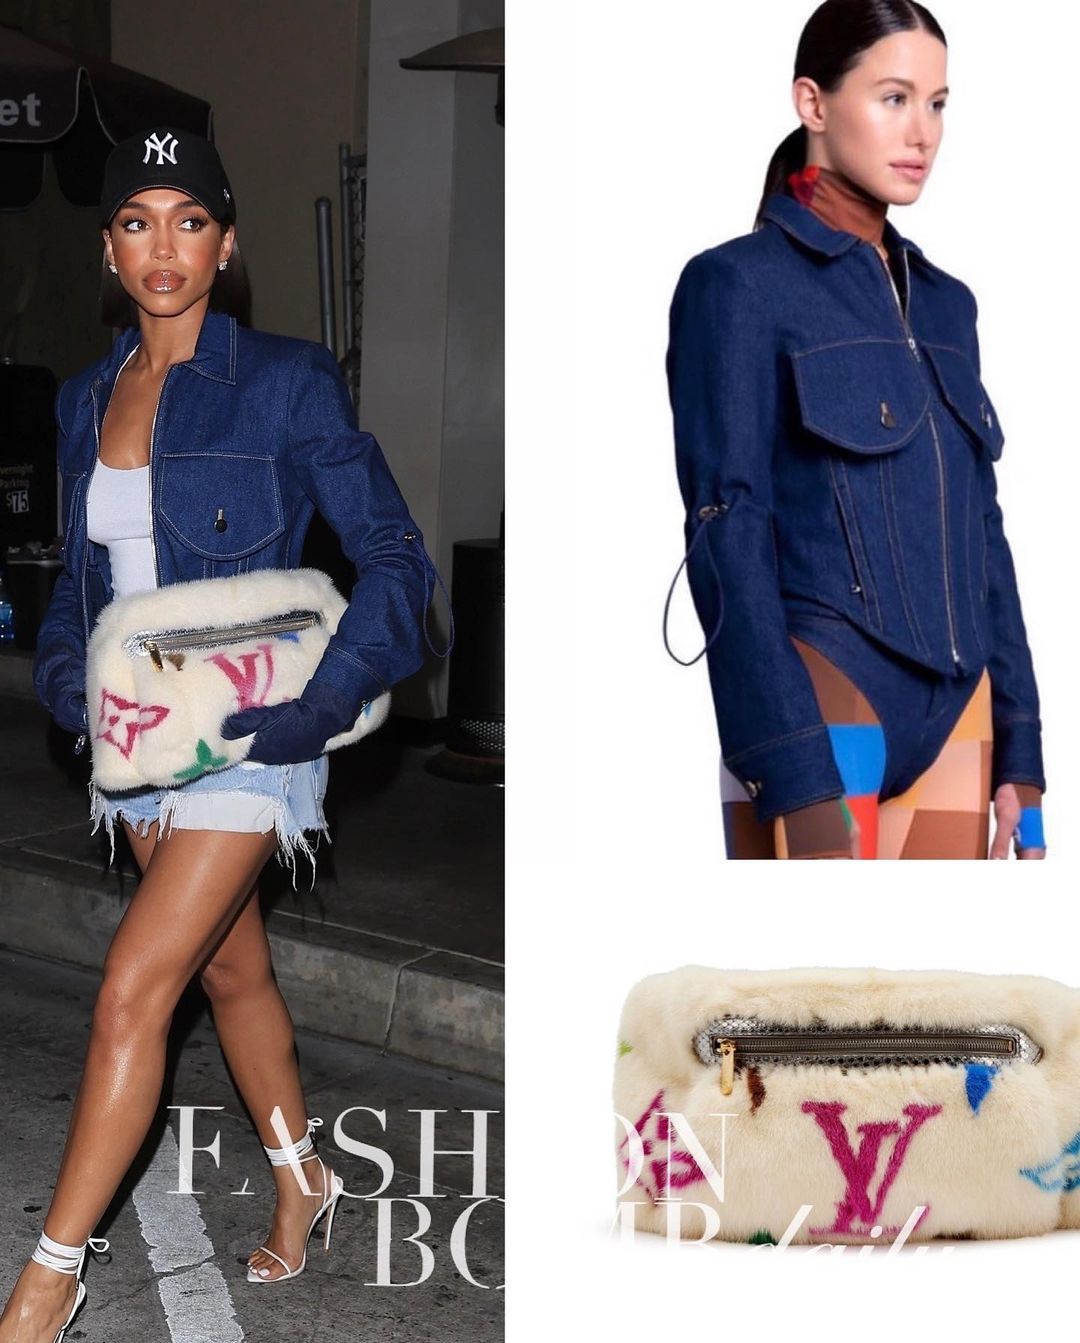 Who Wore it Better? Lori Harvey vs. Amber Rose in Louis Vuitton's